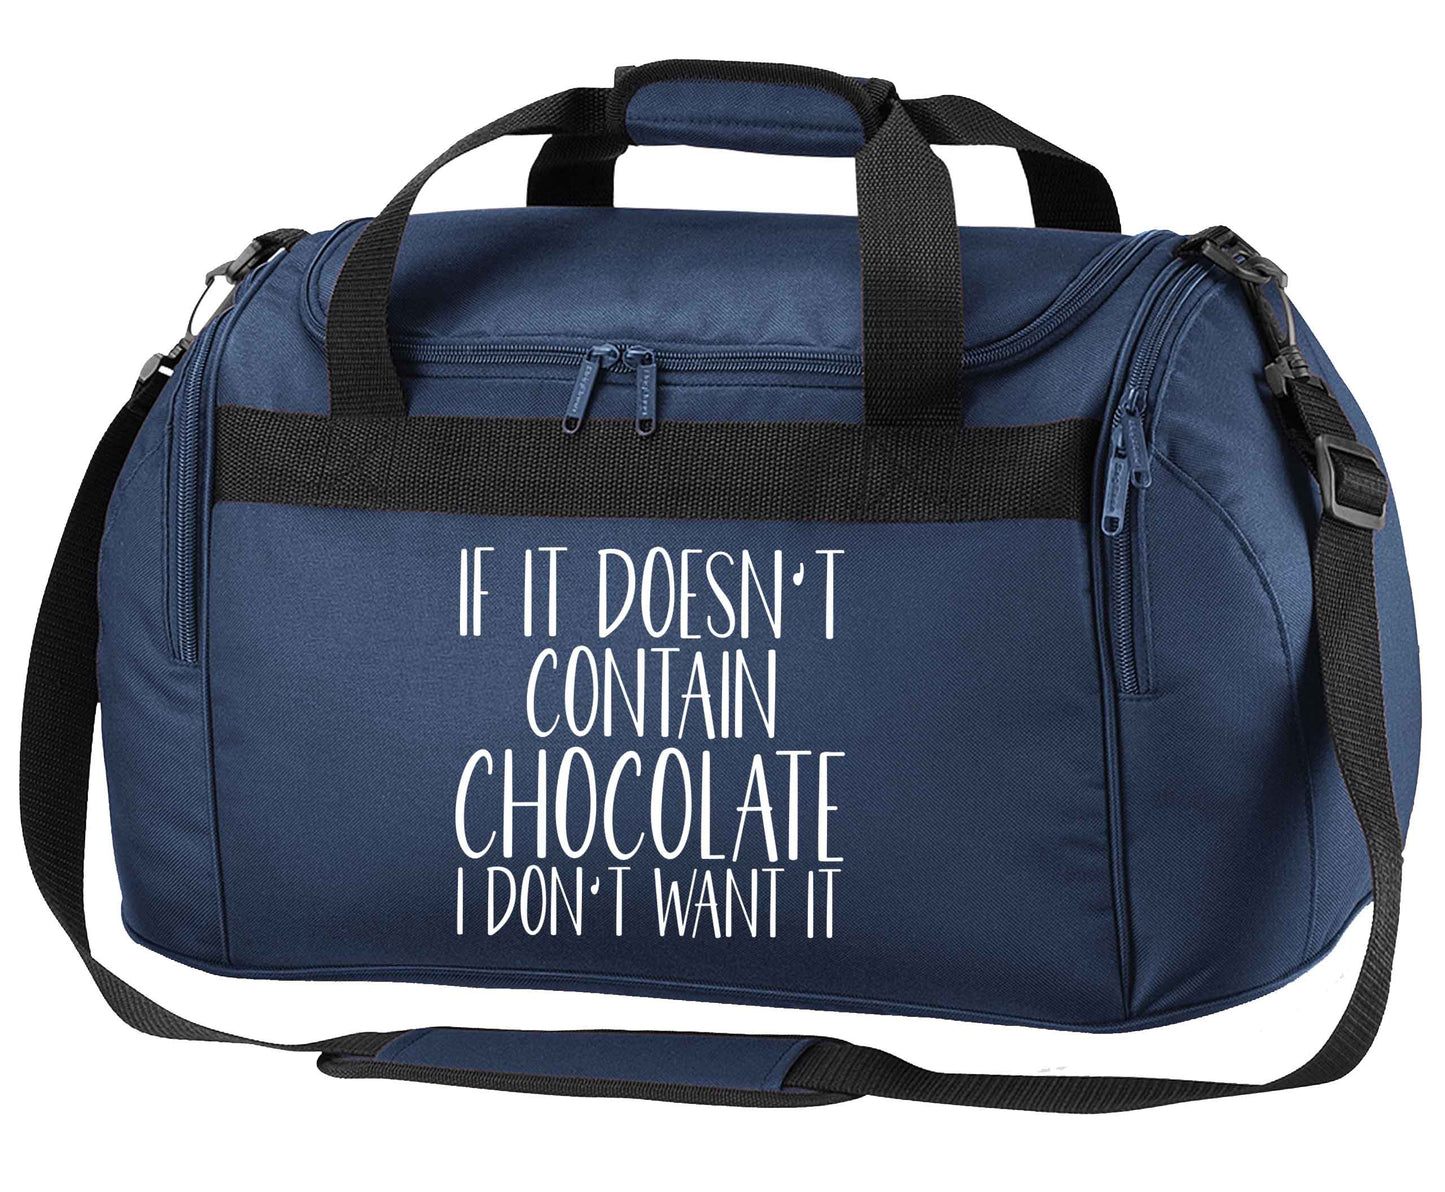 If it doesn't contain chocolate I don't want it navy holdall / duffel bag